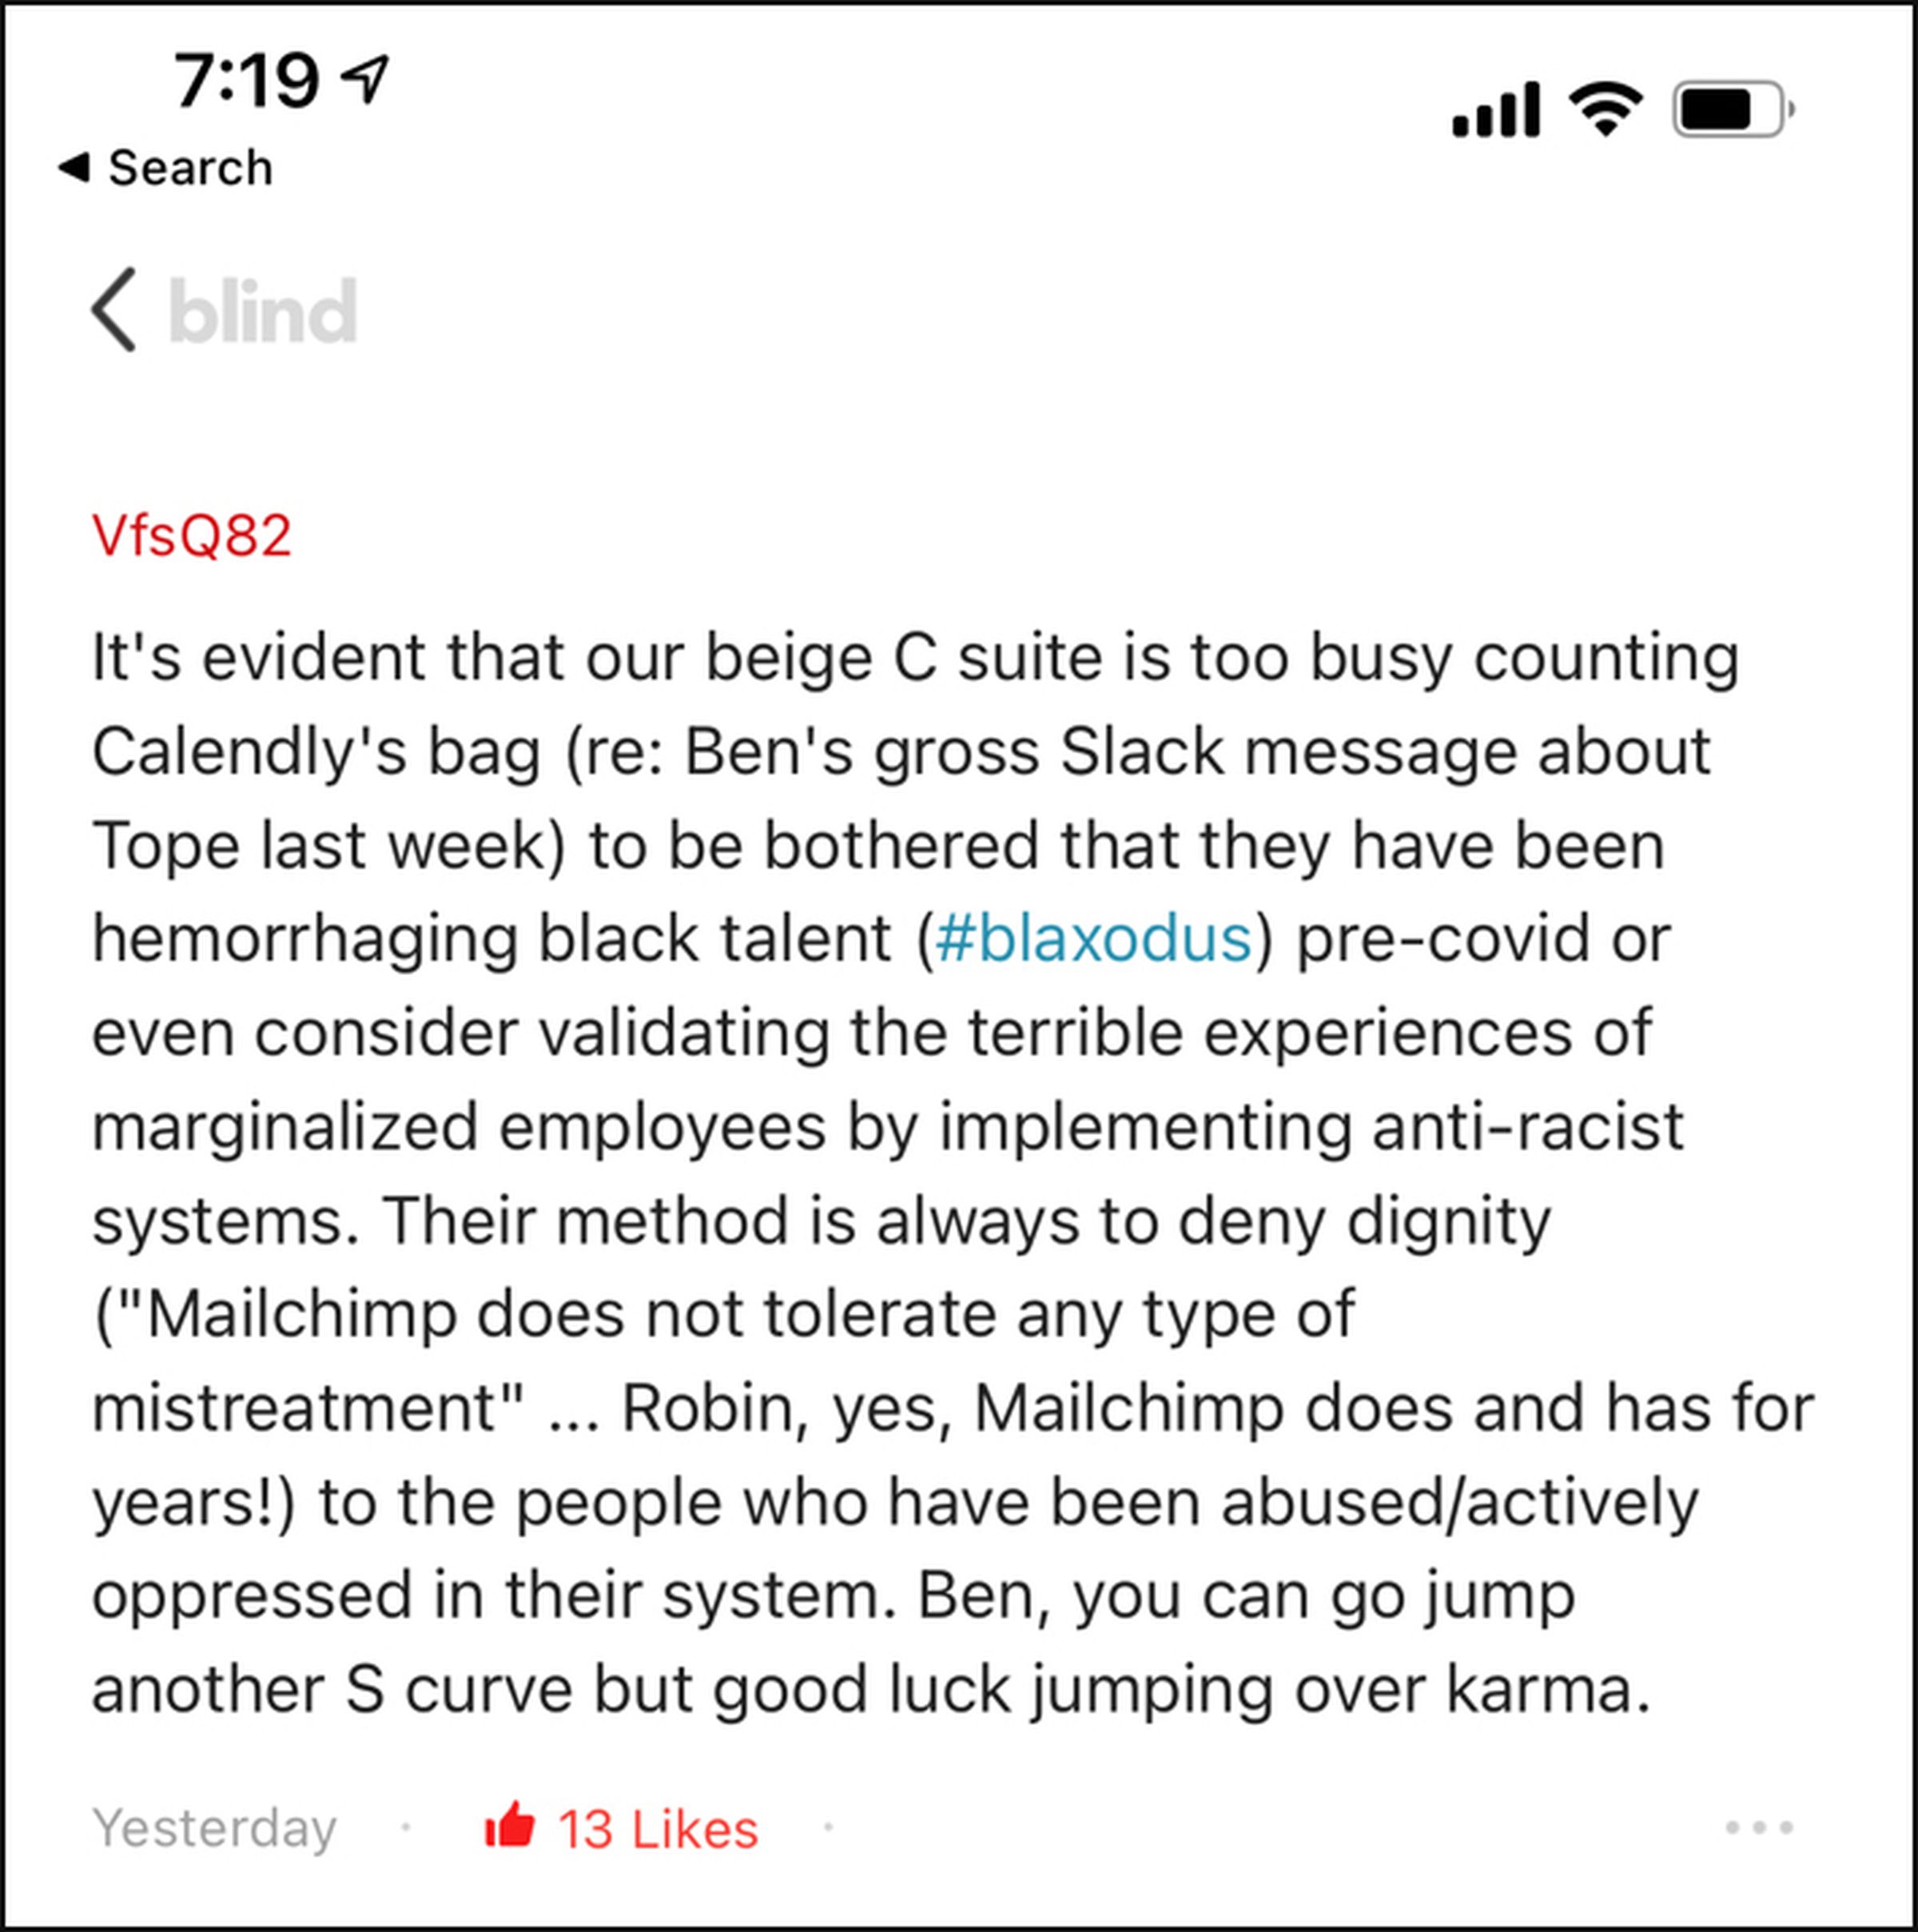 It’s evident that our beige C suite is too busy counting Calendly’s bag (re: Ben’s gross Slack message about Tope last week) to be bothered that they have been hemorrhaging black talent (#blaxodus) pre-covid or even consider validating the terrible experiences of marginalized employees by implementing anti-racist systems.